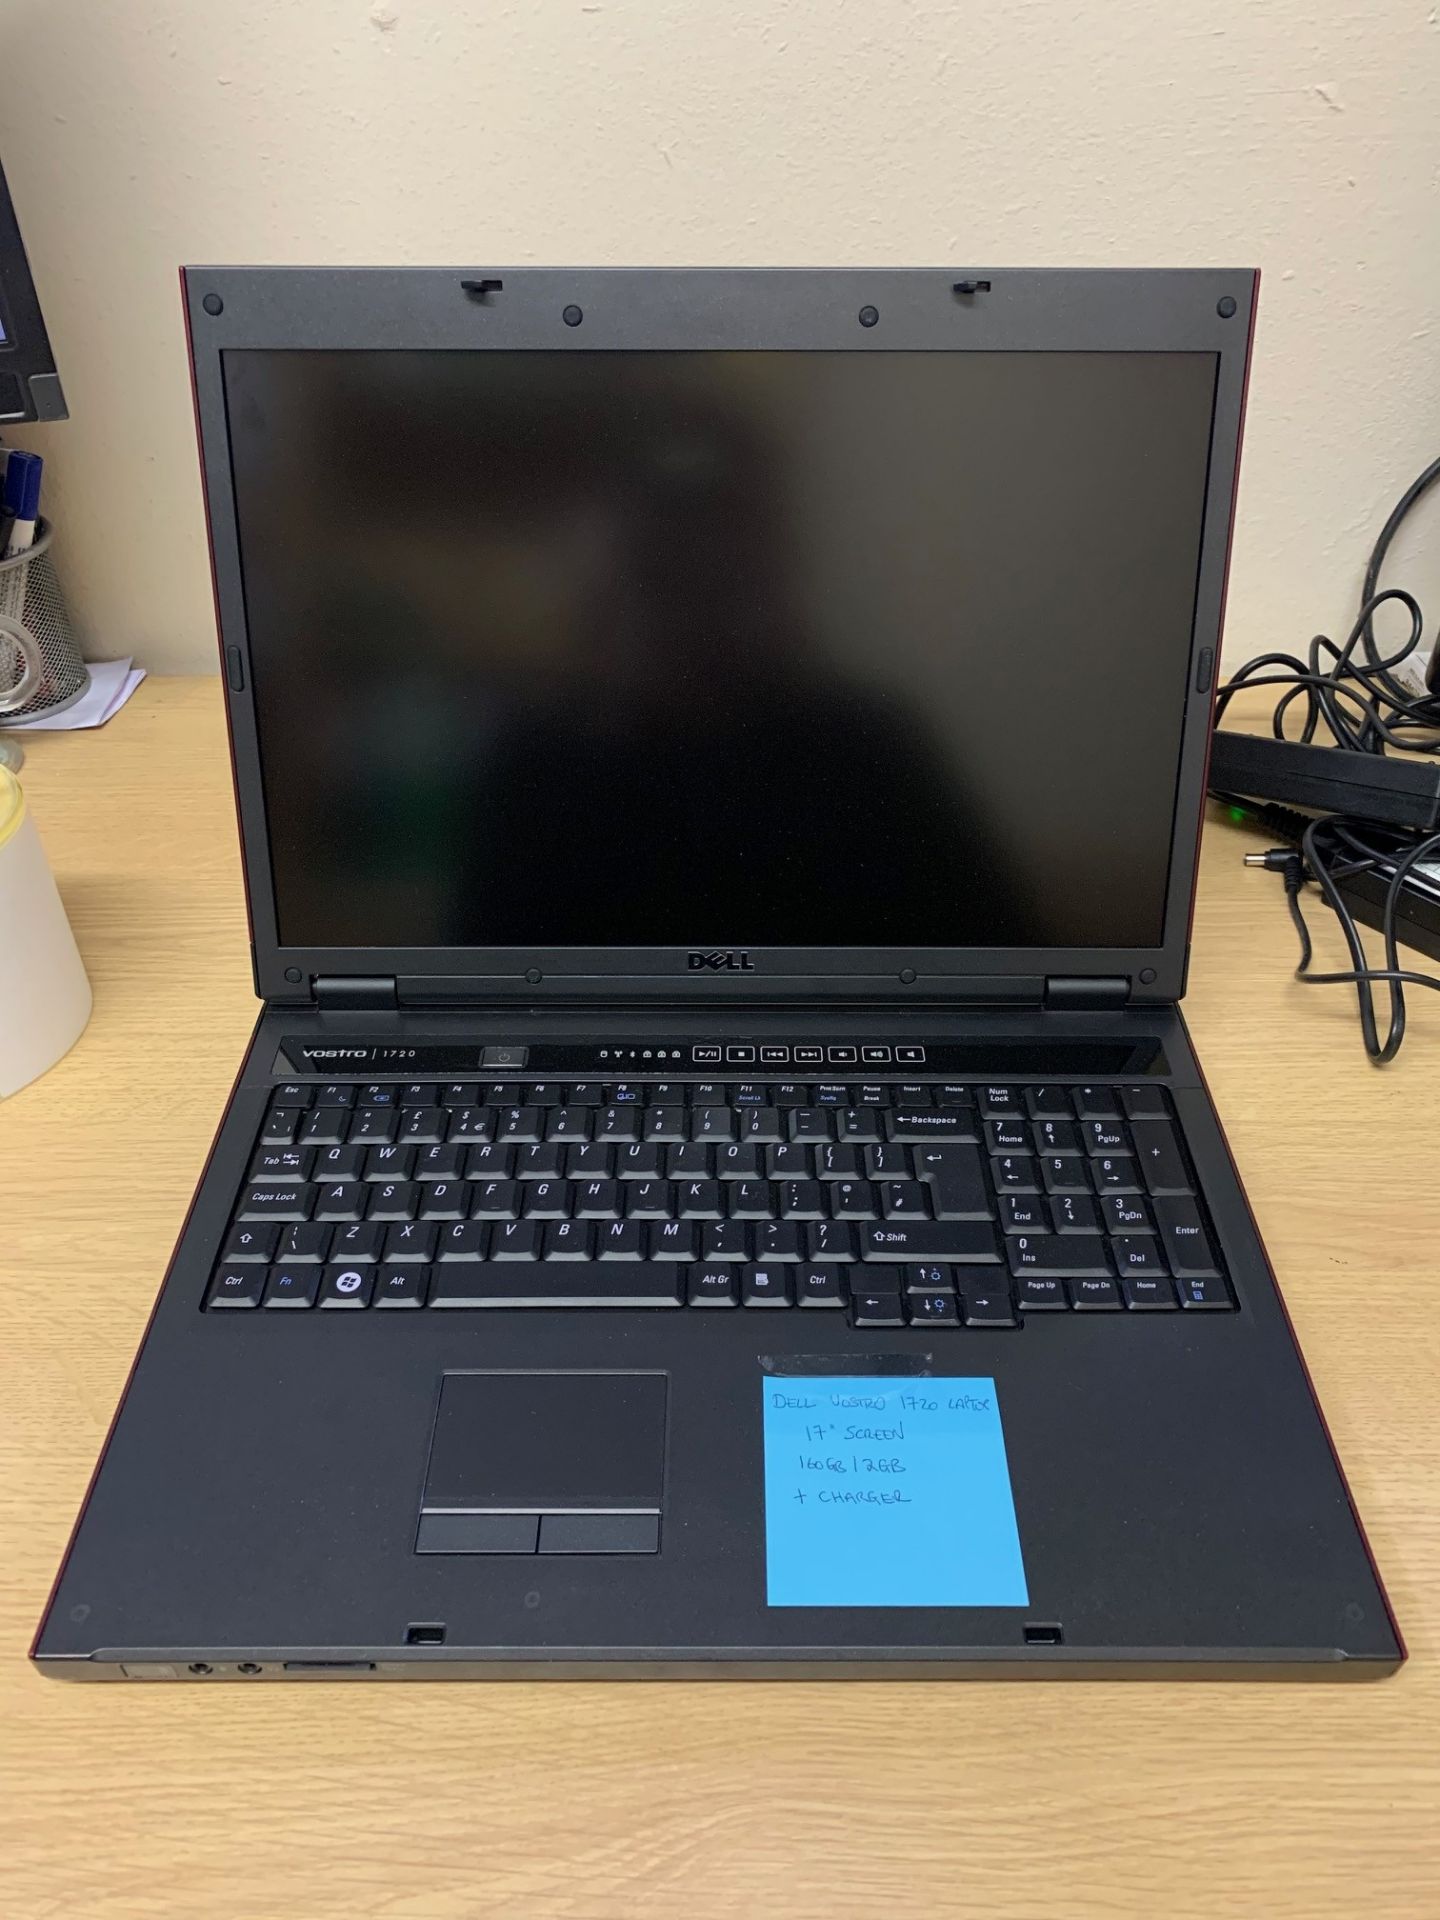 Dell Vostro 1720 Laptop - 160GB Hard Drive, 2GB RAM, 17" Screen, Loaded With Windows XP & Complete - Image 2 of 4